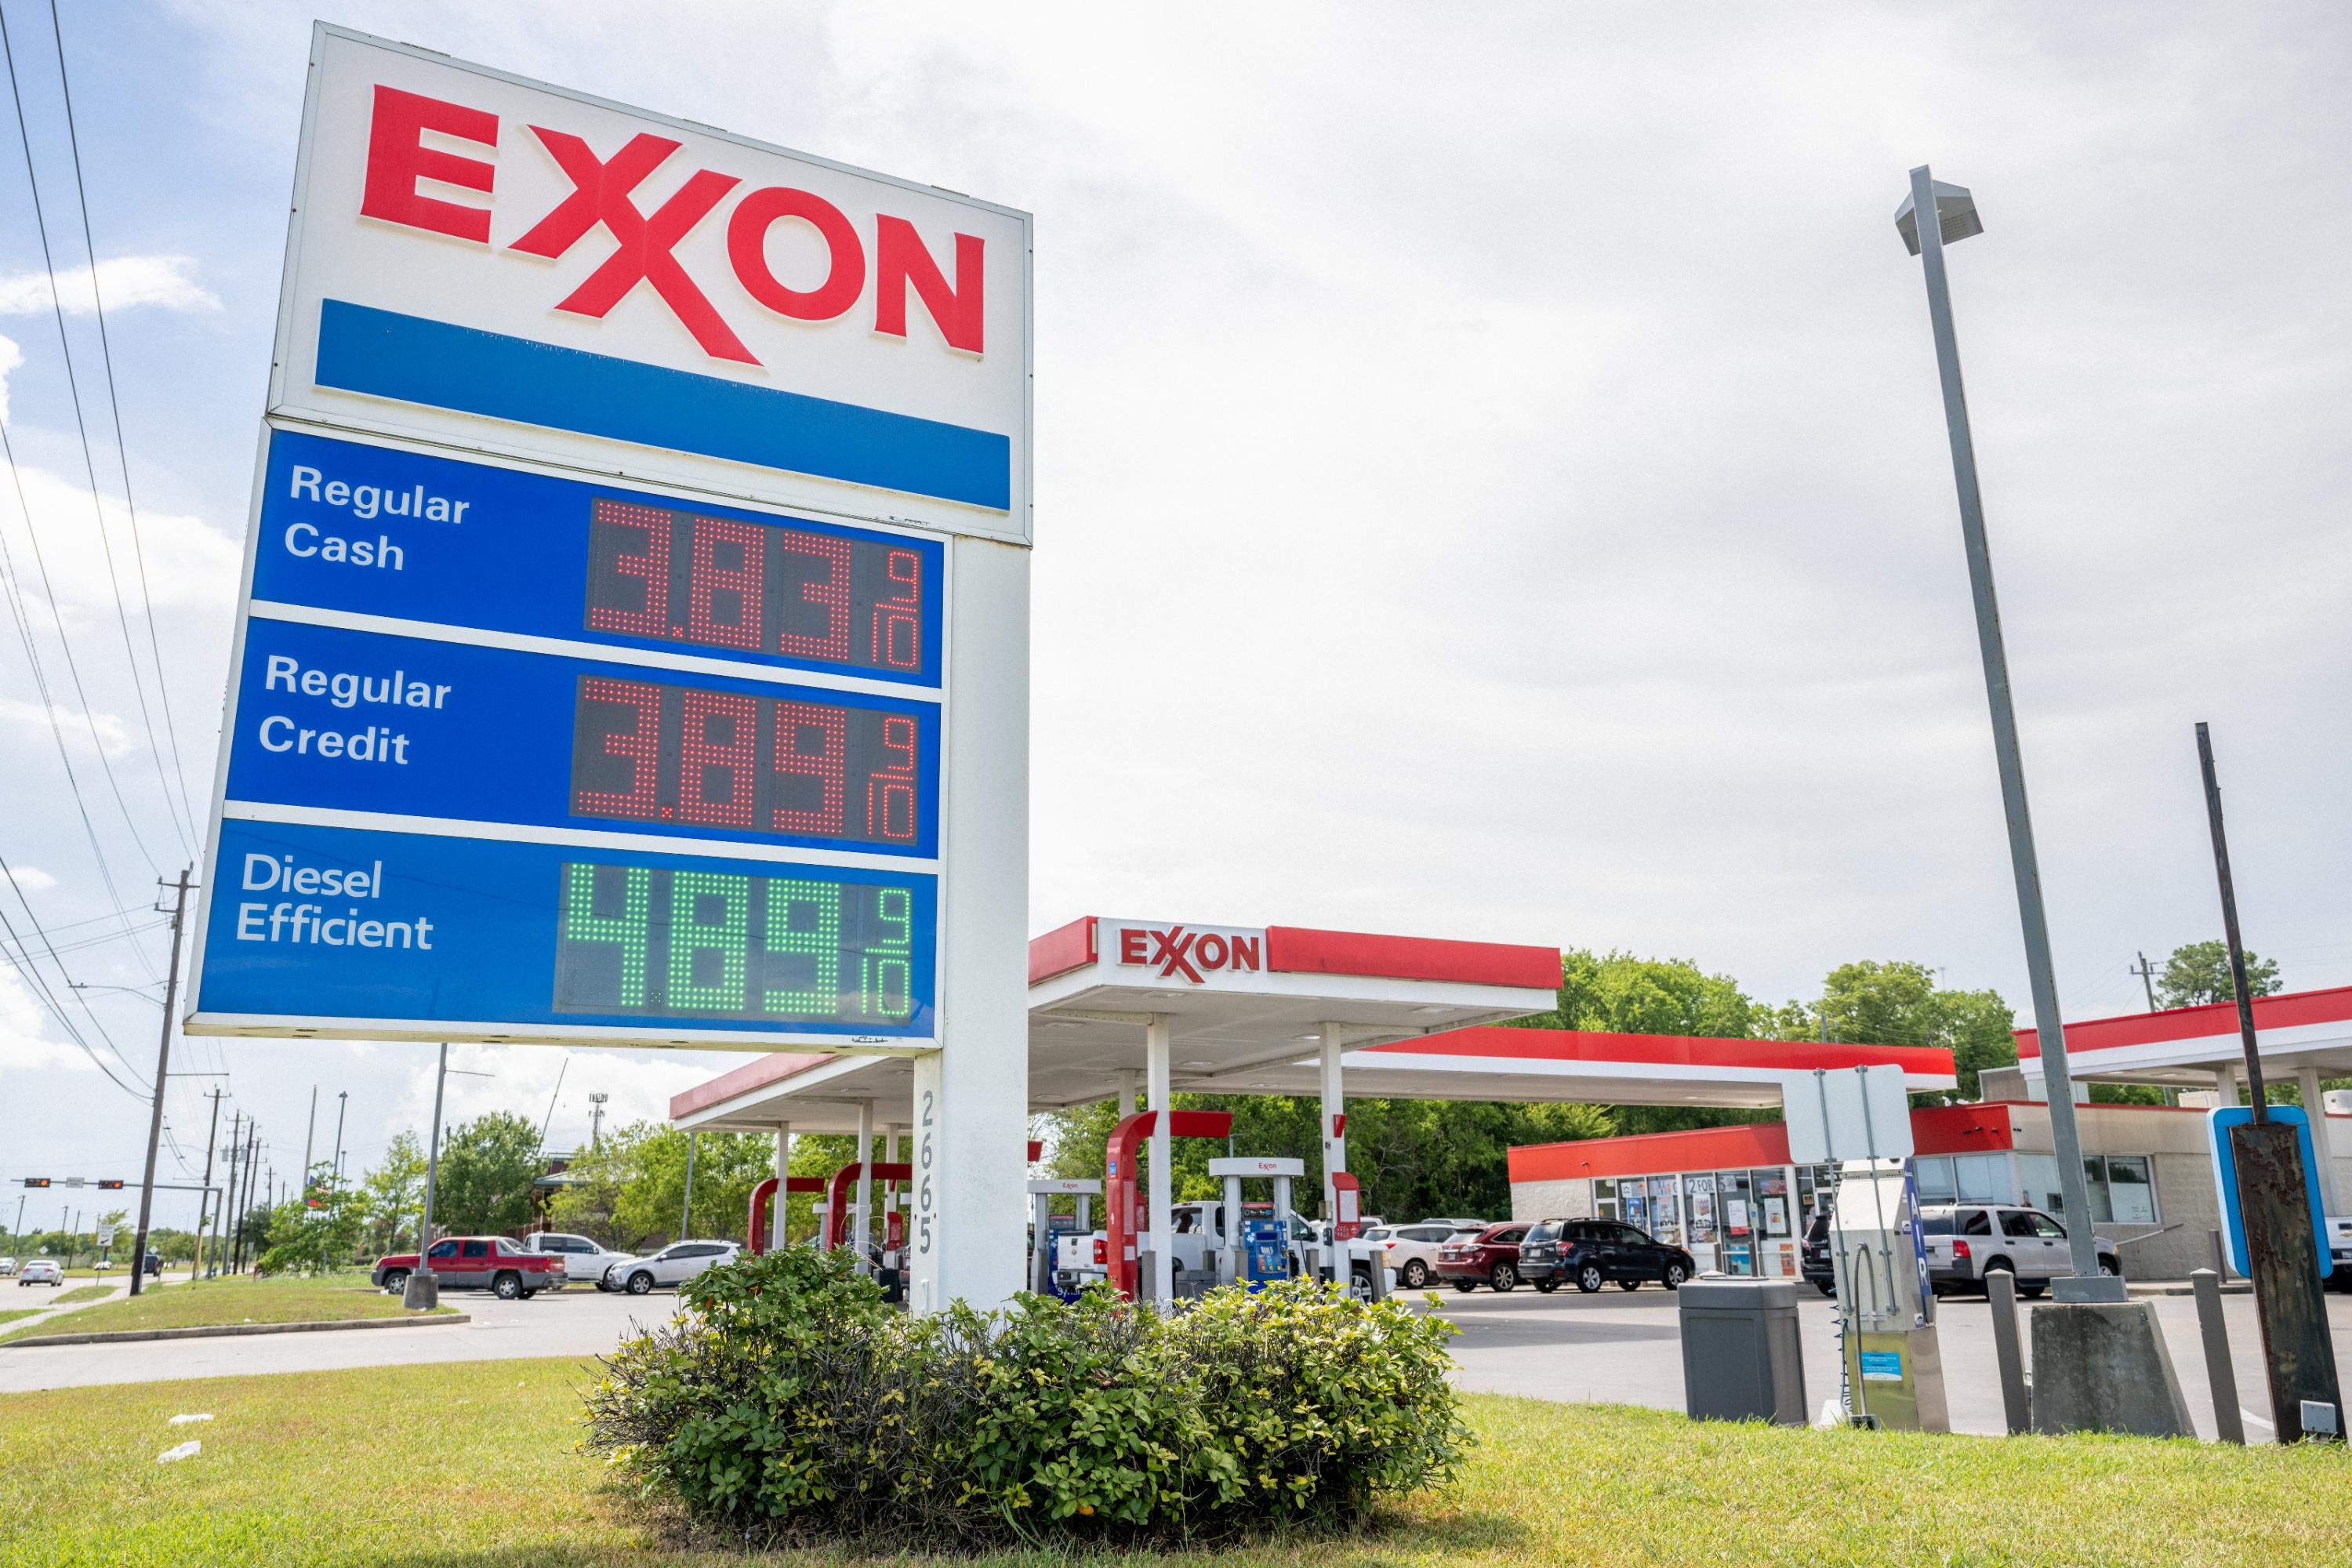 Exxon gas prices are displayed in Texas